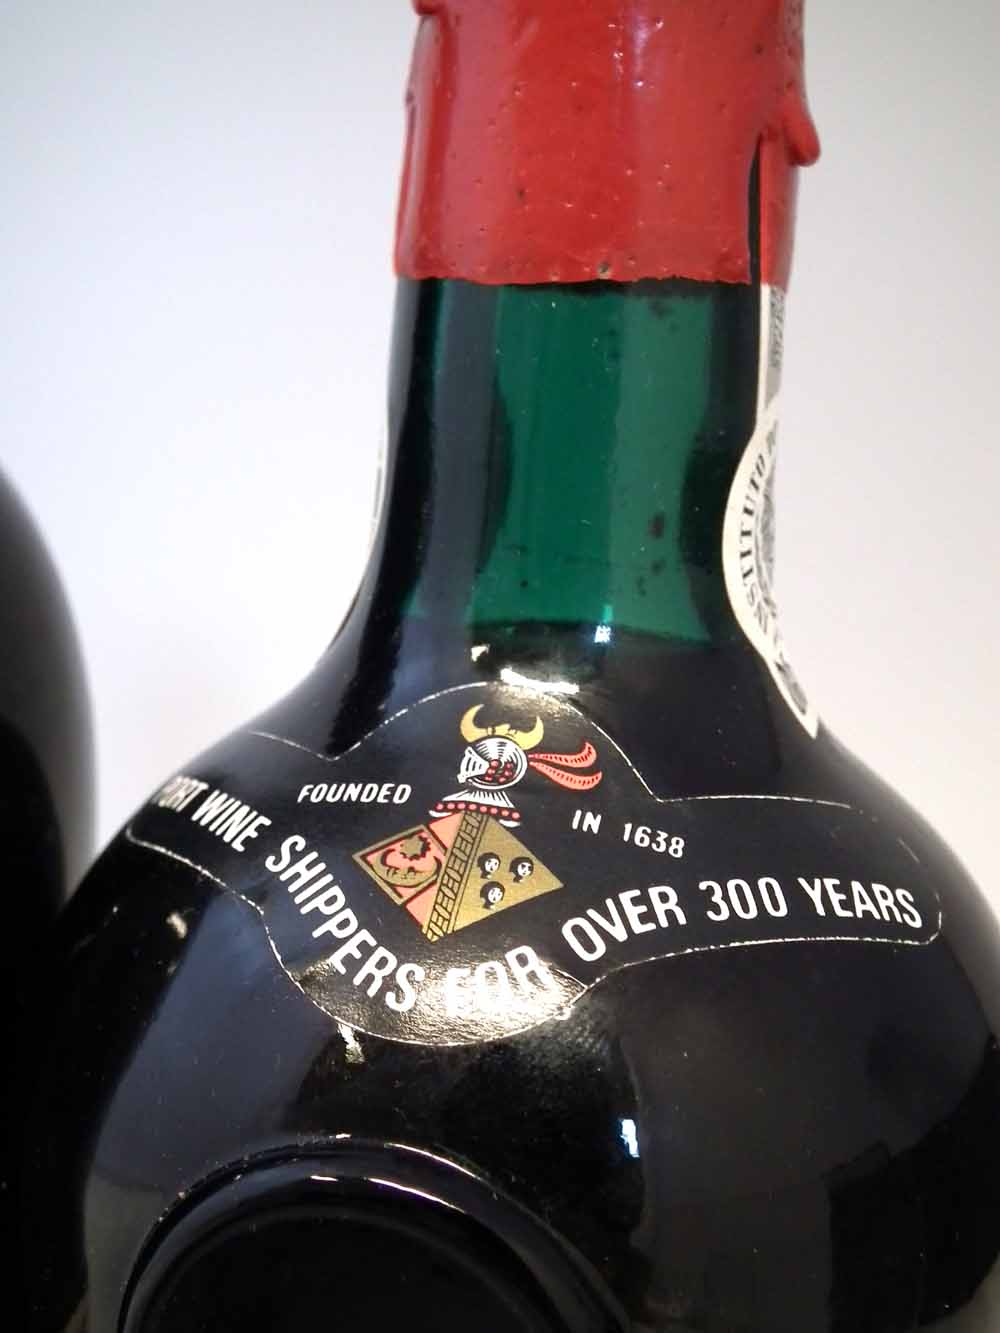 Port: to include Niepoorts Tawny oak aged 1984, Noval 10 years matured bottled in 1982, Kopke - Image 6 of 14